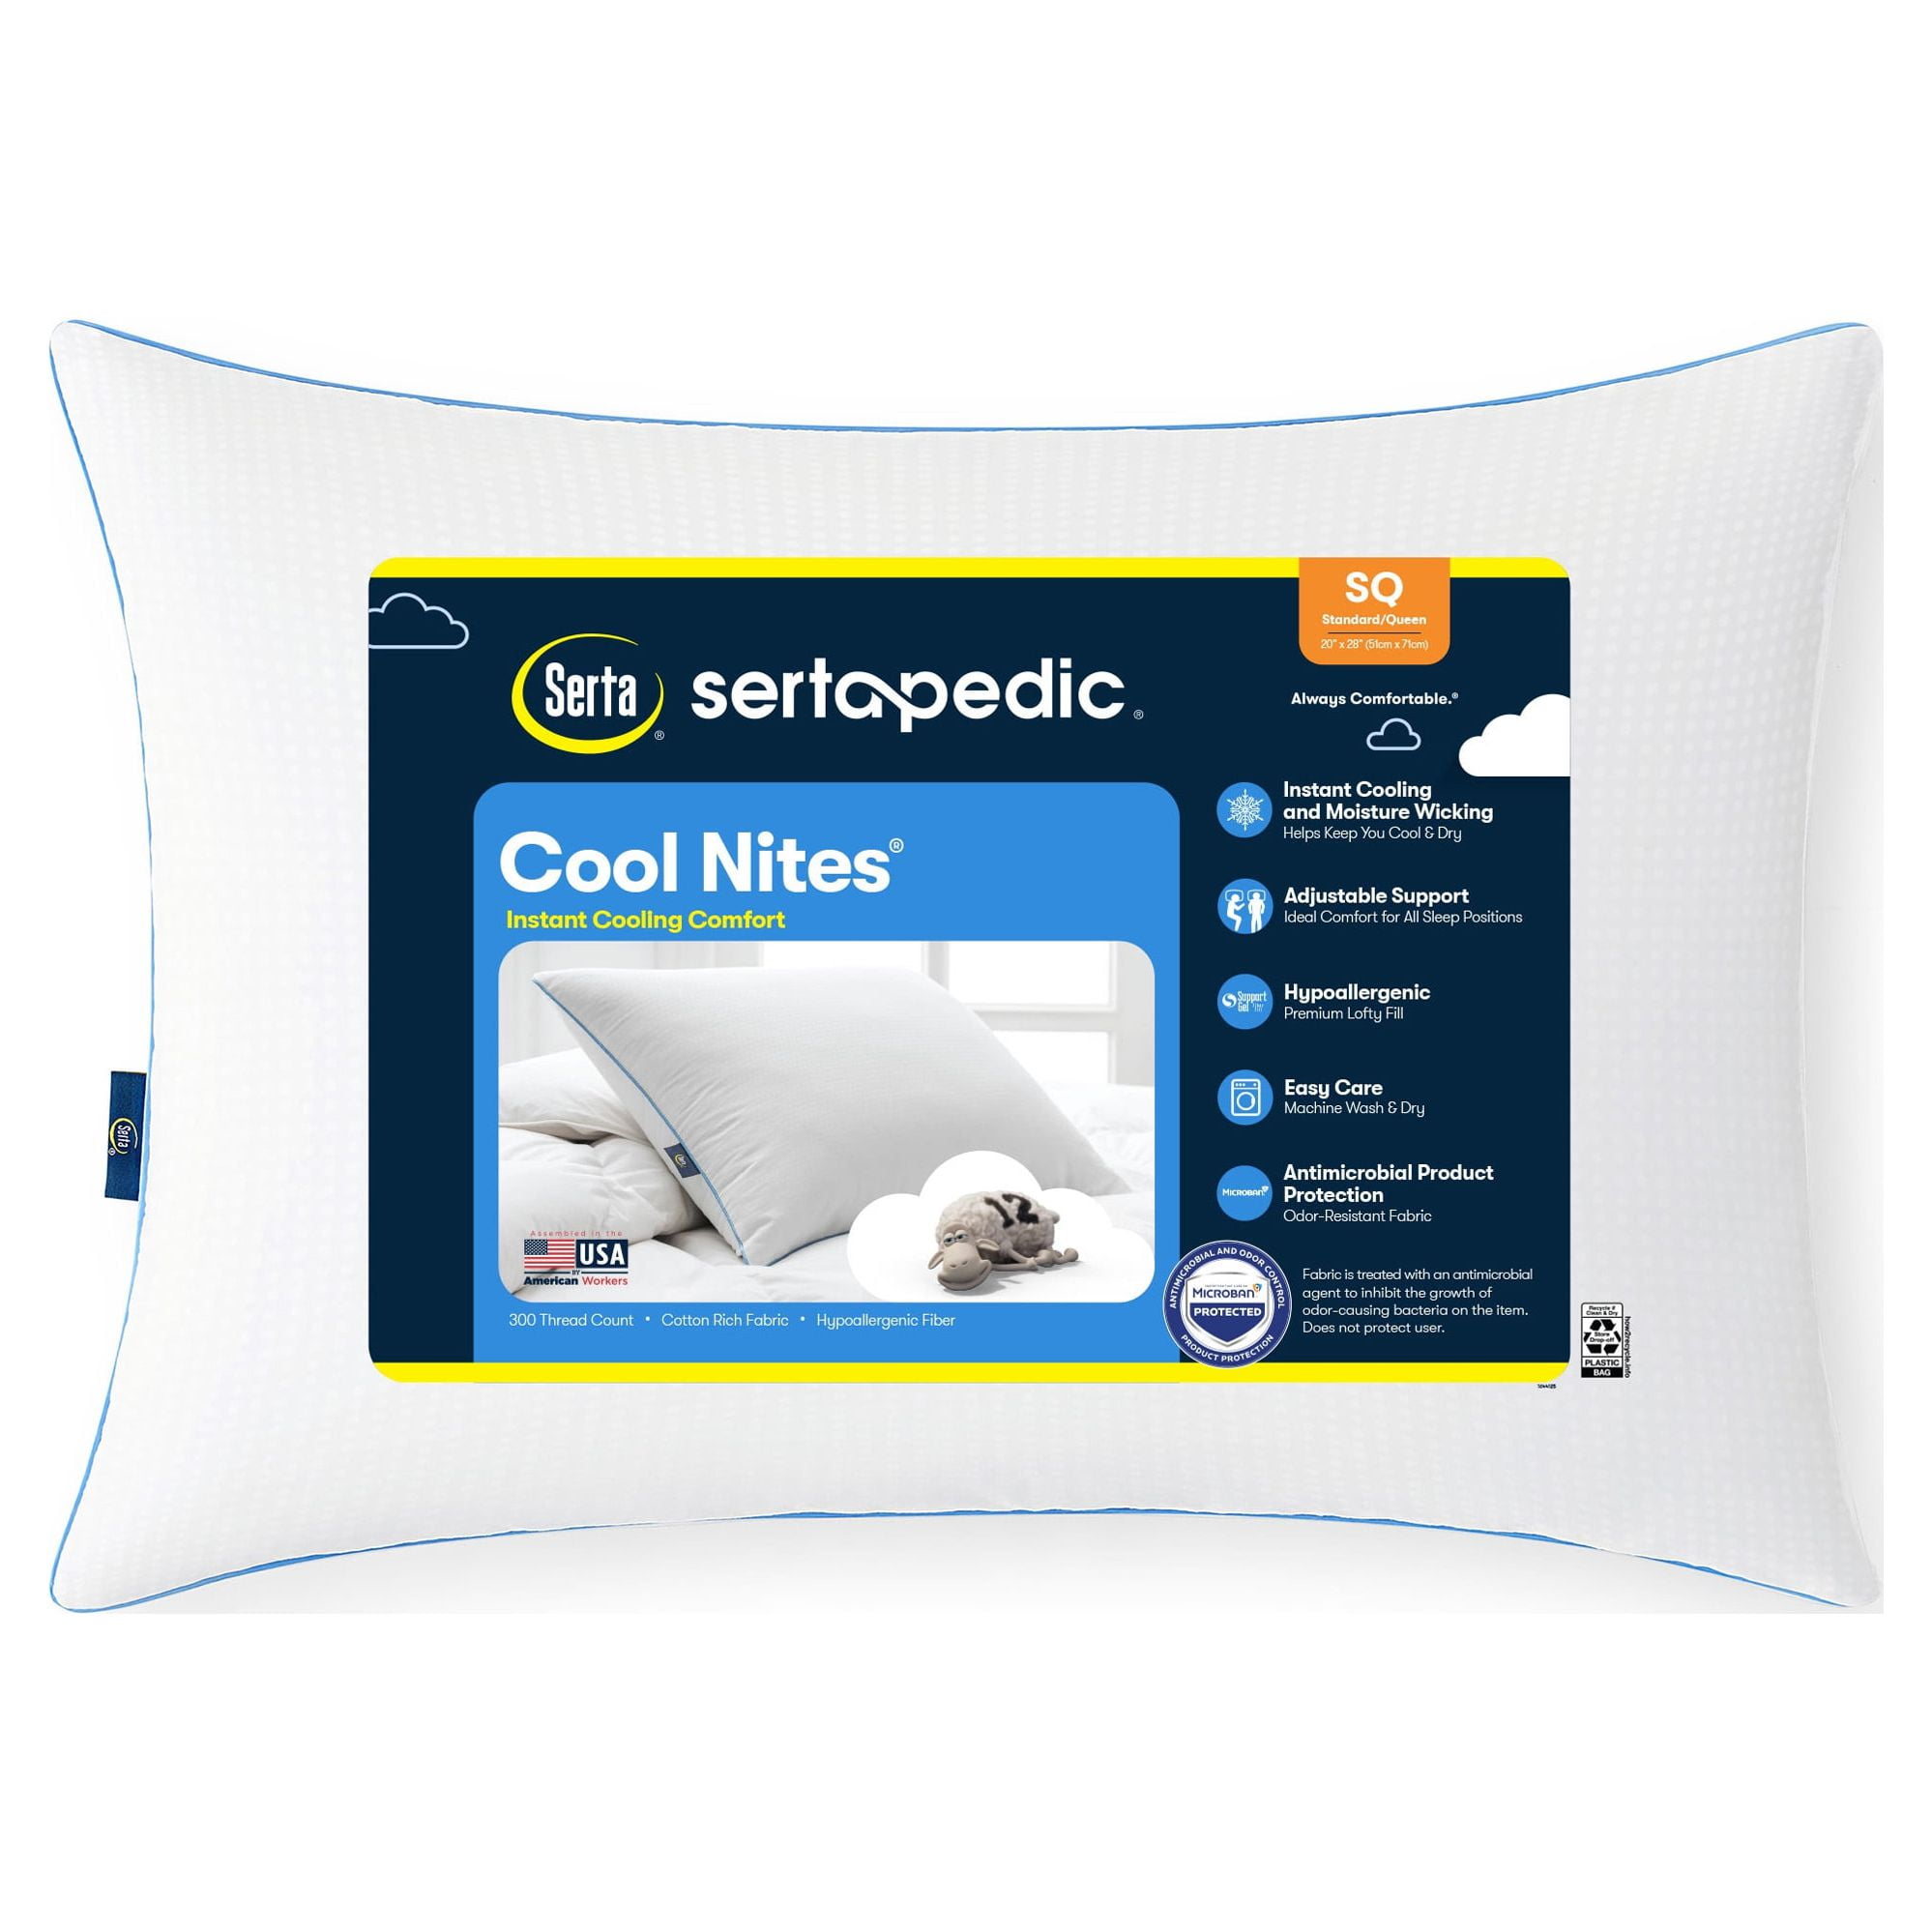 Premium Soft Hip Support Pillow, Shop Today. Get it Tomorrow!